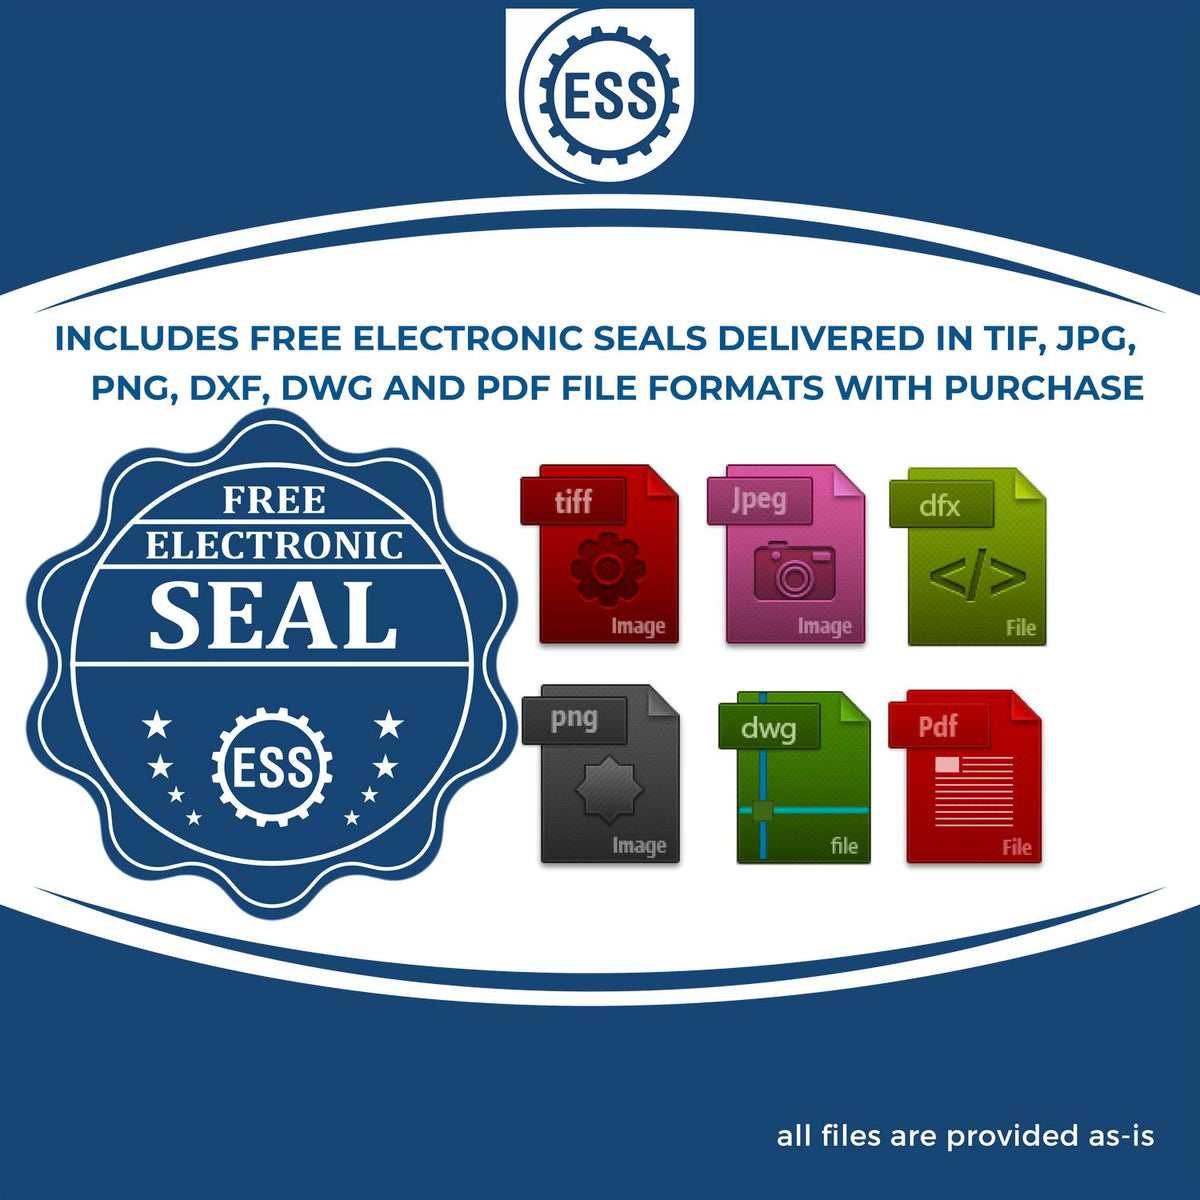 An infographic for the free electronic seal for the State of South Dakota Long Reach Architectural Embossing Seal illustrating the different file type icons such as DXF, DWG, TIF, JPG and PNG.